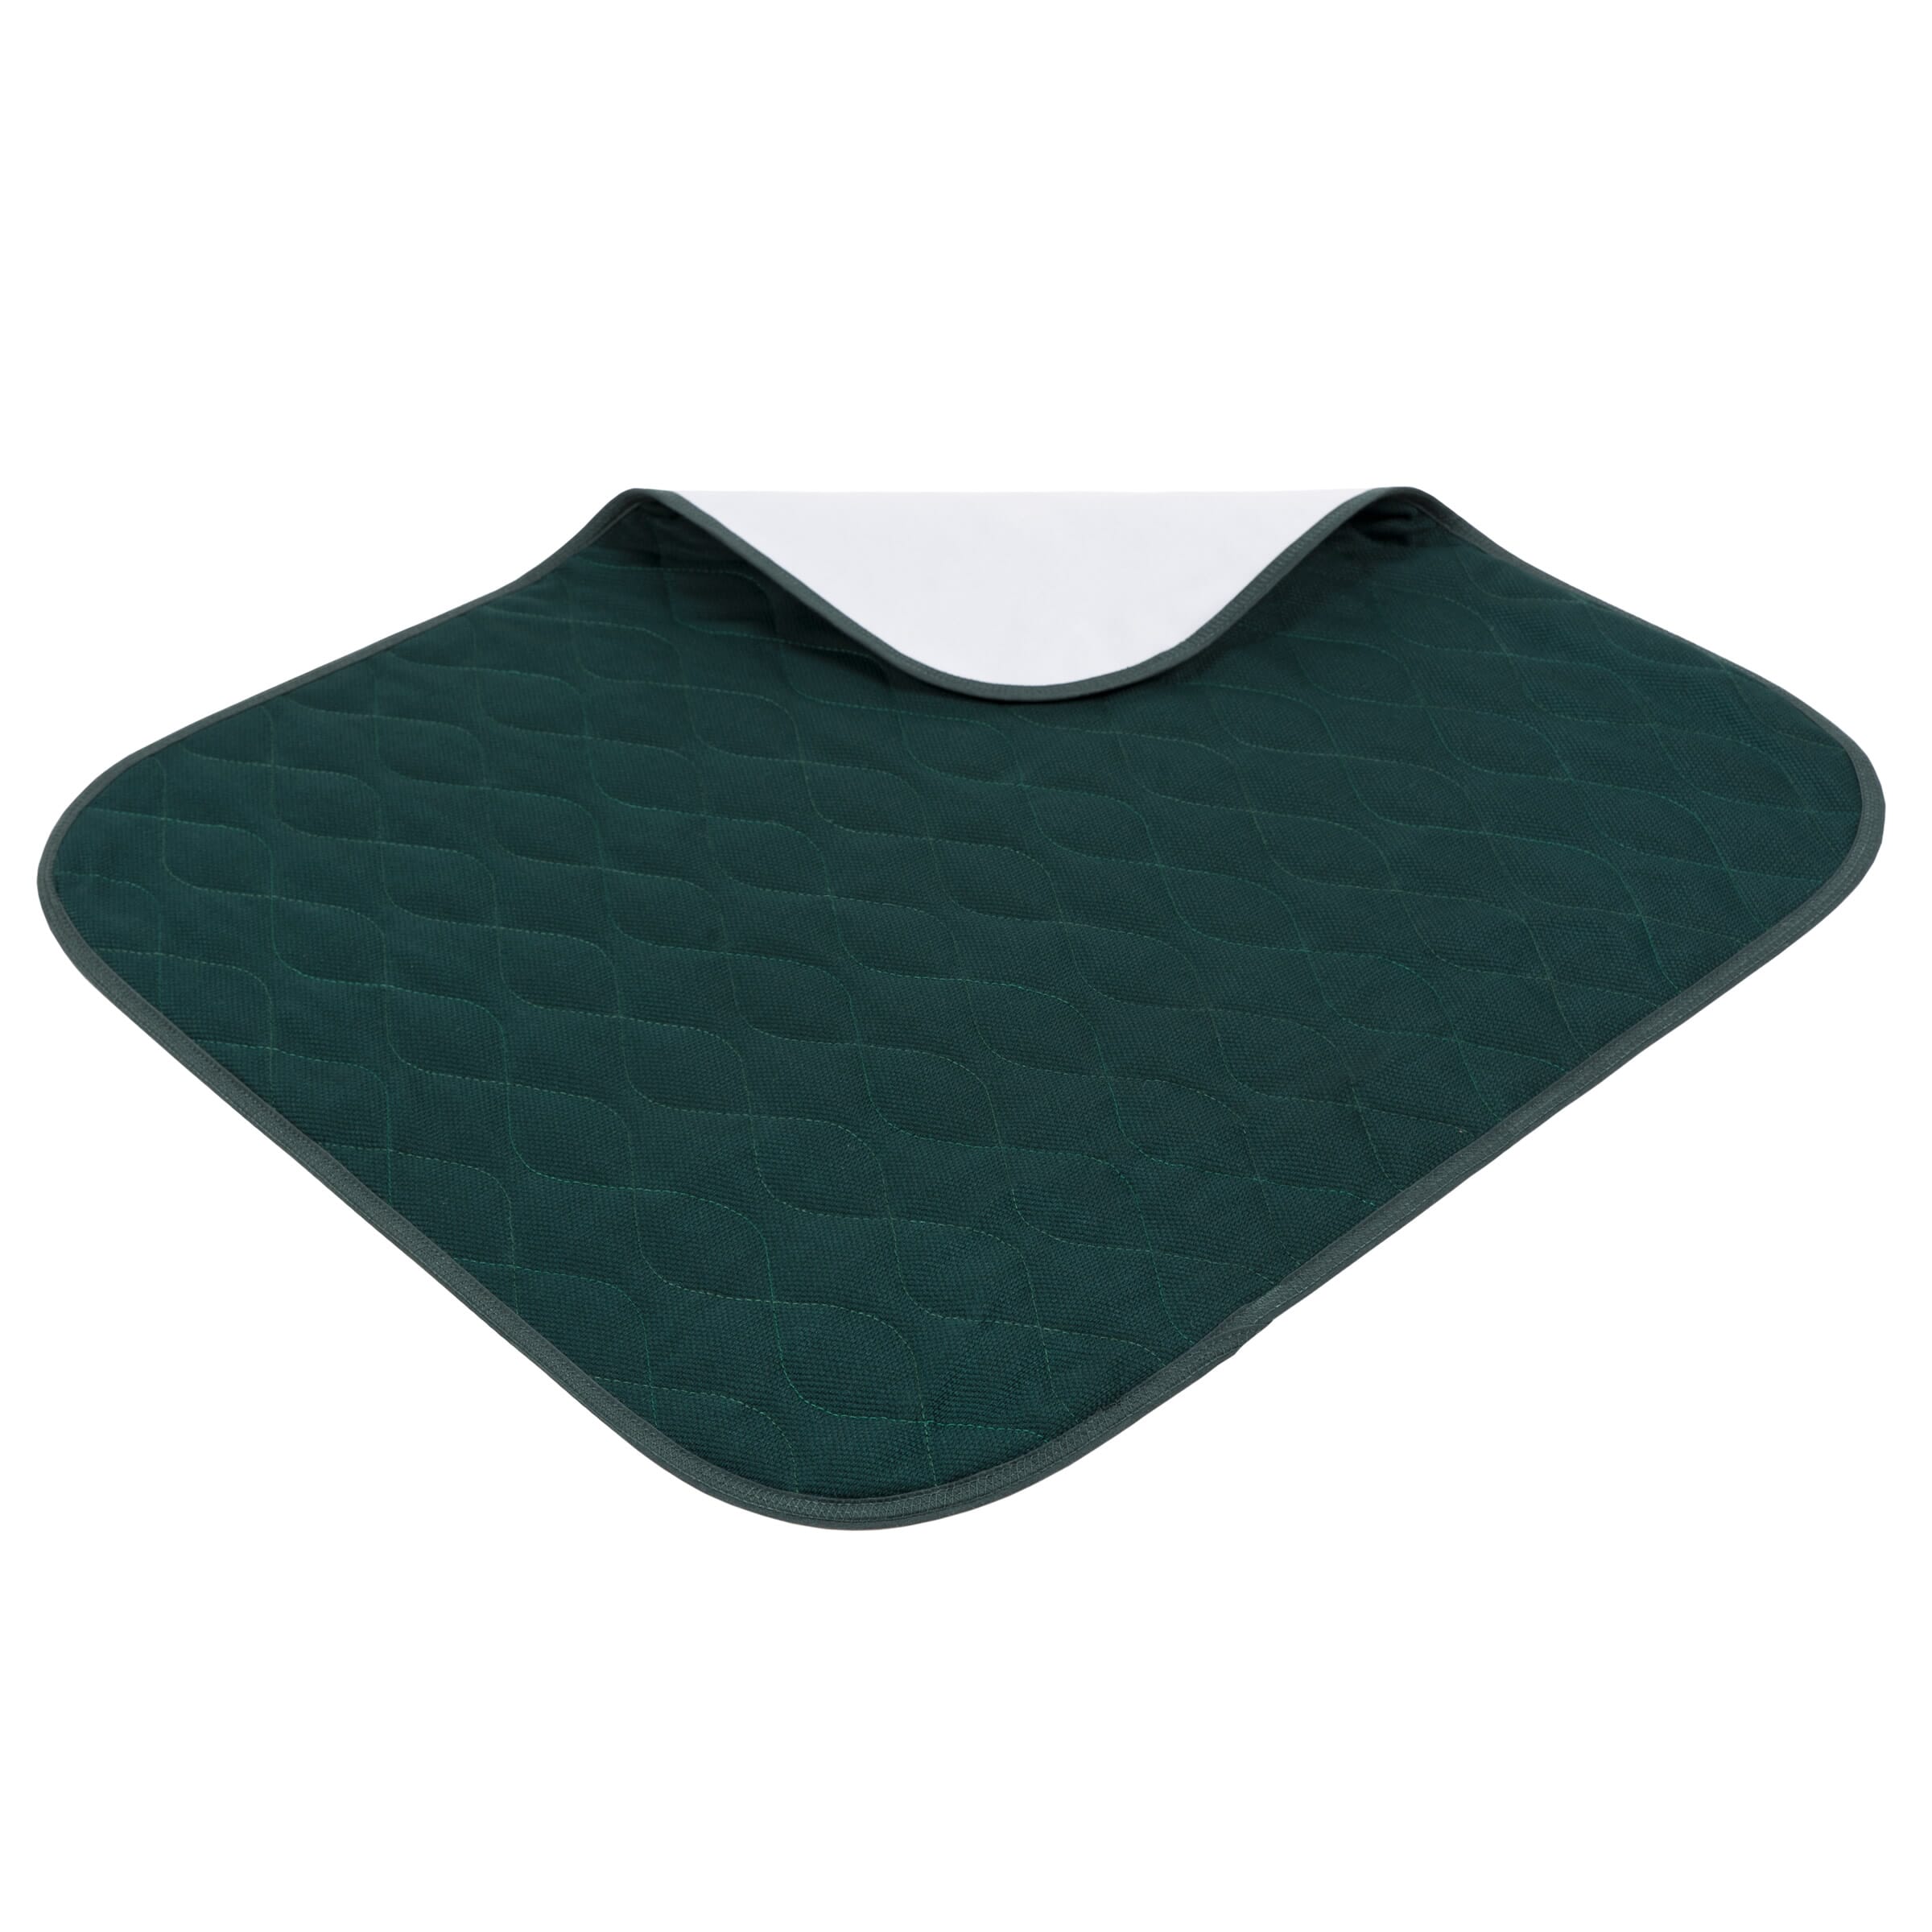 View Incontinence Chair Pads Green information